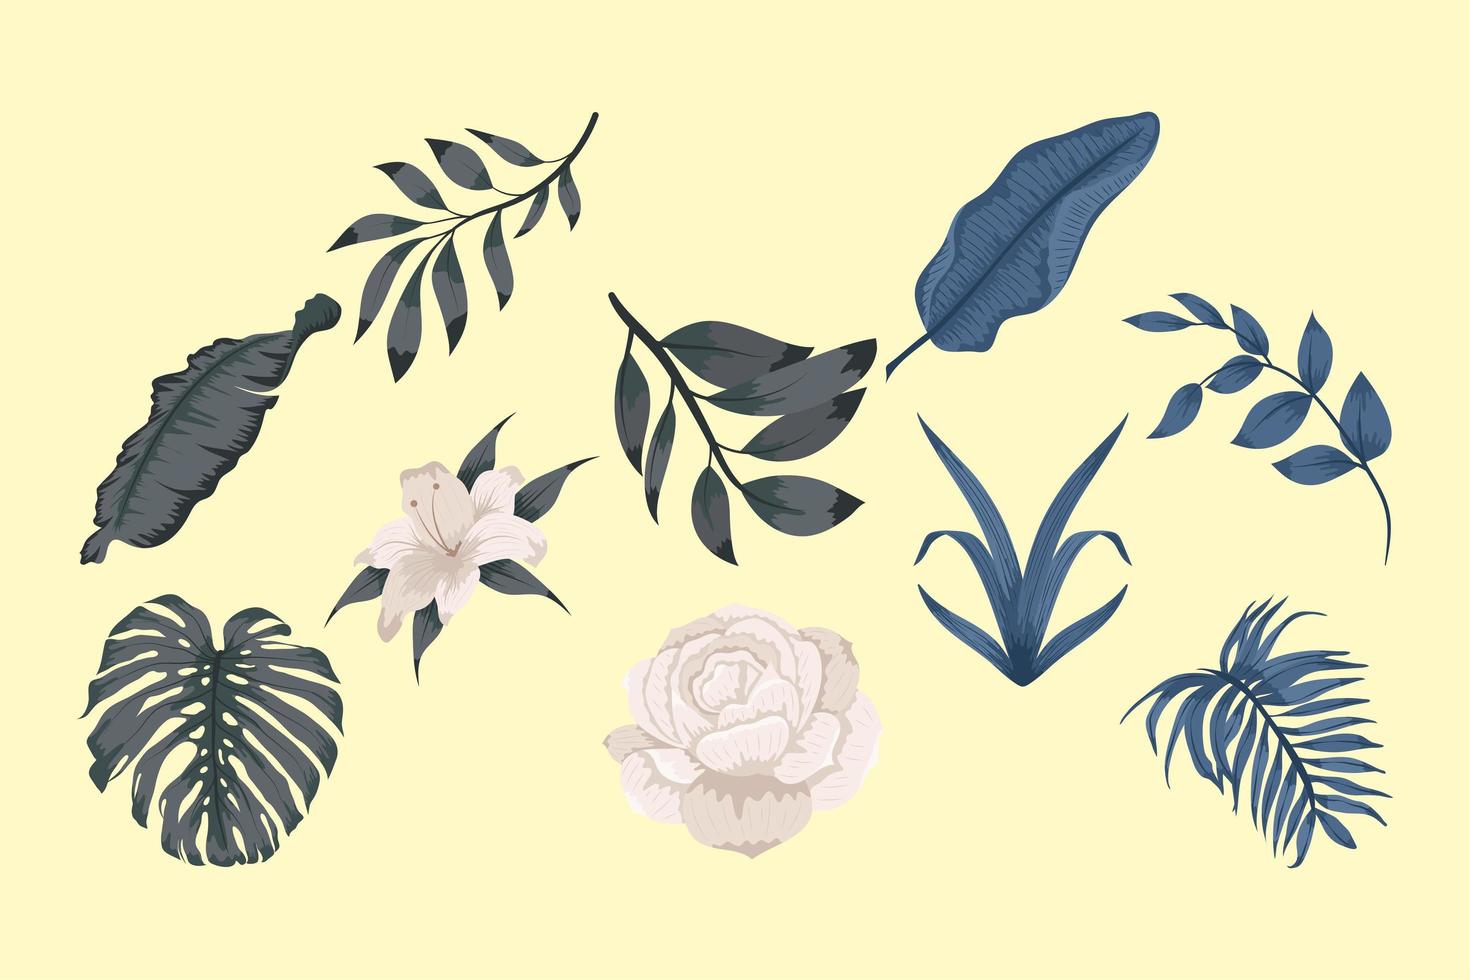 ten leaves and flowers vector